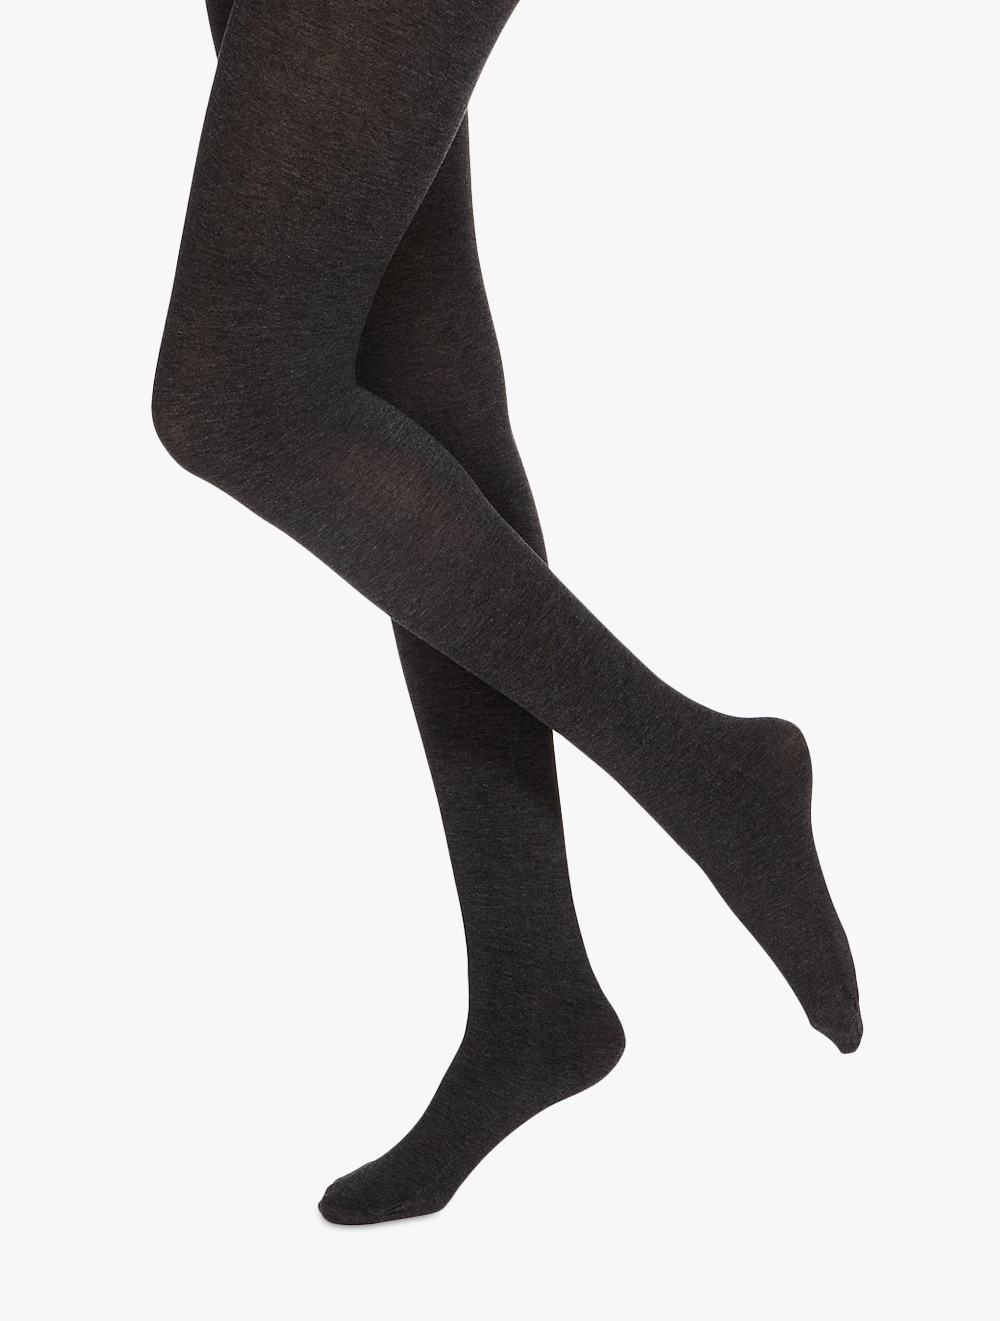 Opaque Tights - Black - Spencer's